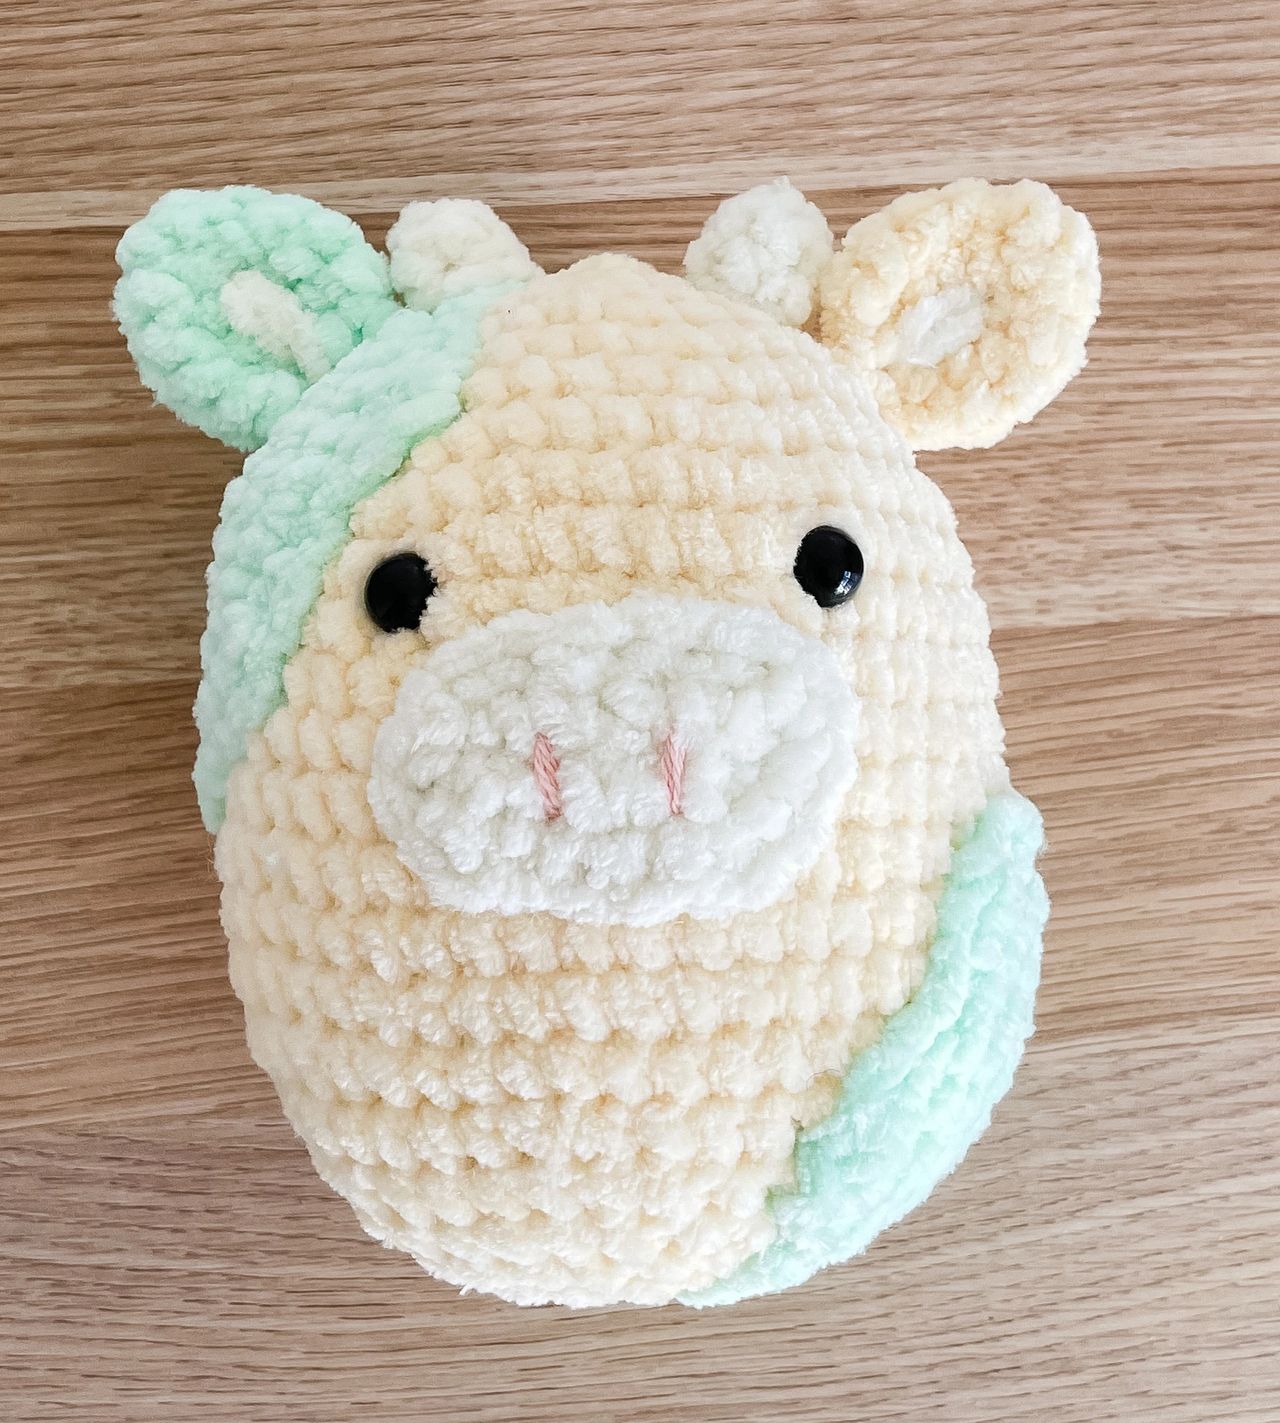 Rose and Lily Amigurumi: Crochet Squishy Cow - Free Crochet Pattern